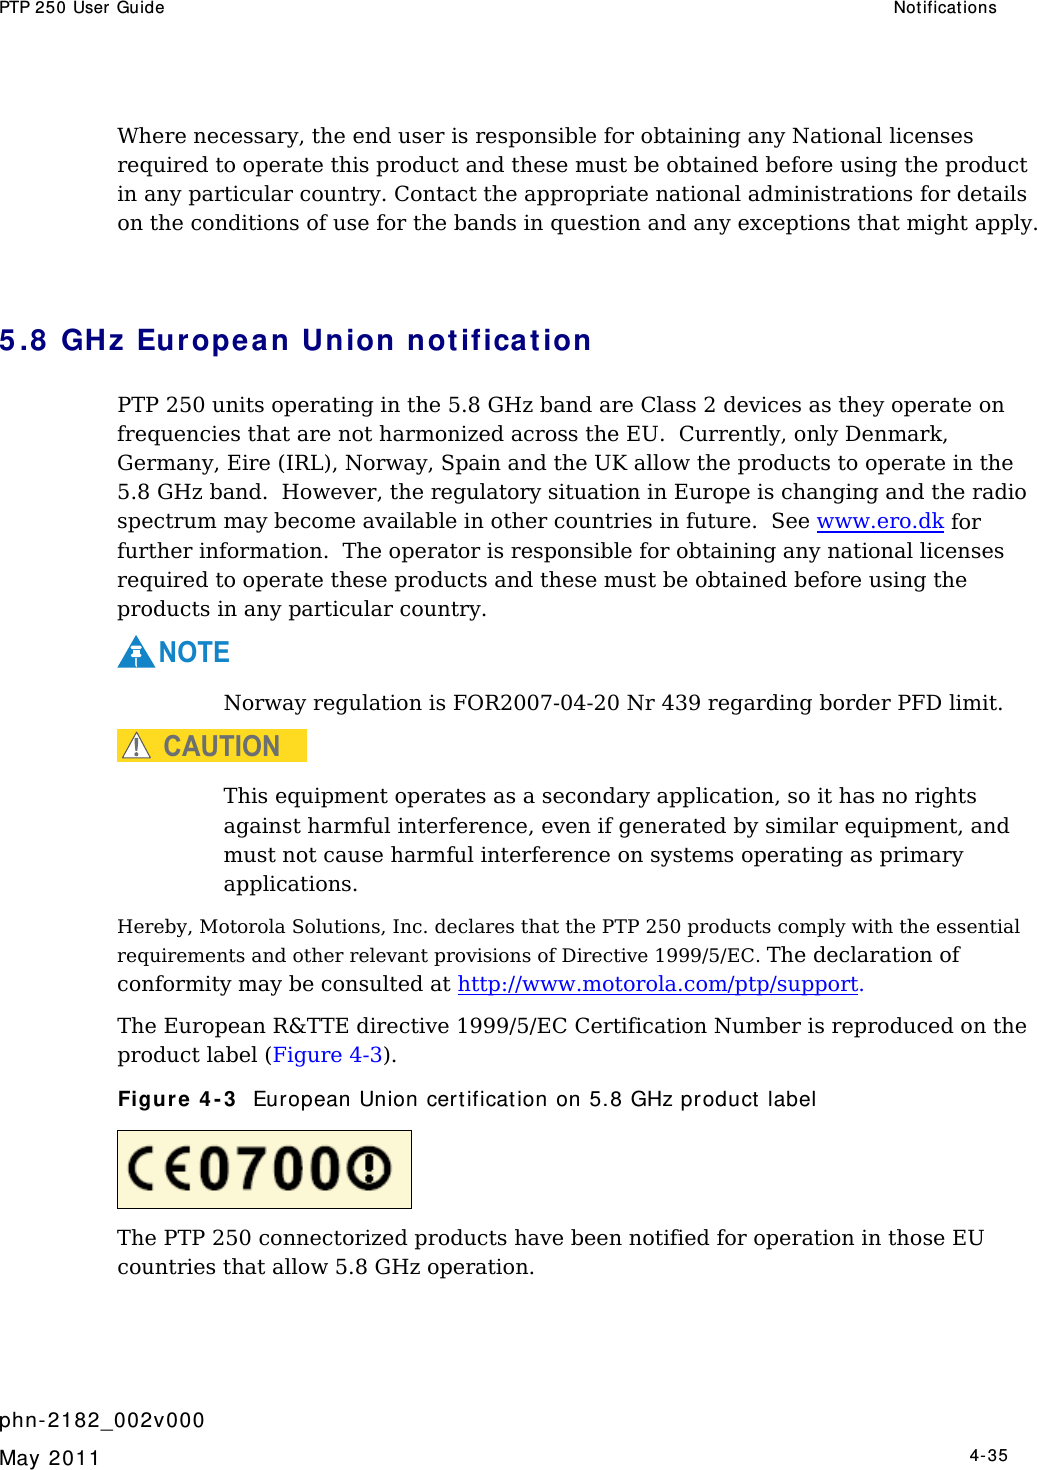 PTP 250 User Guide  Notificat ions   phn- 2182_002v000   May 2011   4-35  Where necessary, the end user is responsible for obtaining any National licenses required to operate this product and these must be obtained before using the product in any particular country. Contact the appropriate national administrations for details on the conditions of use for the bands in question and any exceptions that might apply.  5 .8  GHz Europe a n Union not ificat ion PTP 250 units operating in the 5.8 GHz band are Class 2 devices as they operate on frequencies that are not harmonized across the EU.  Currently, only Denmark, Germany, Eire (IRL), Norway, Spain and the UK allow the products to operate in the 5.8 GHz band.  However, the regulatory situation in Europe is changing and the radio spectrum may become available in other countries in future.  See www.ero.dk for further information.  The operator is responsible for obtaining any national licenses required to operate these products and these must be obtained before using the products in any particular country. NOTE Norway regulation is FOR2007-04-20 Nr 439 regarding border PFD limit. CAUTION This equipment operates as a secondary application, so it has no rights against harmful interference, even if generated by similar equipment, and must not cause harmful interference on systems operating as primary applications. Hereby, Motorola Solutions, Inc. declares that the PTP 250 products comply with the essential requirements and other relevant provisions of Directive 1999/5/EC. The declaration of conformity may be consulted at http://www.motorola.com/ptp/support. The European R&amp;TTE directive 1999/5/EC Certification Number is reproduced on the product label (Figure 4-3). Figure 4 - 3   European Union cert ification on 5.8 GHz product  label  The PTP 250 connectorized products have been notified for operation in those EU countries that allow 5.8 GHz operation.   